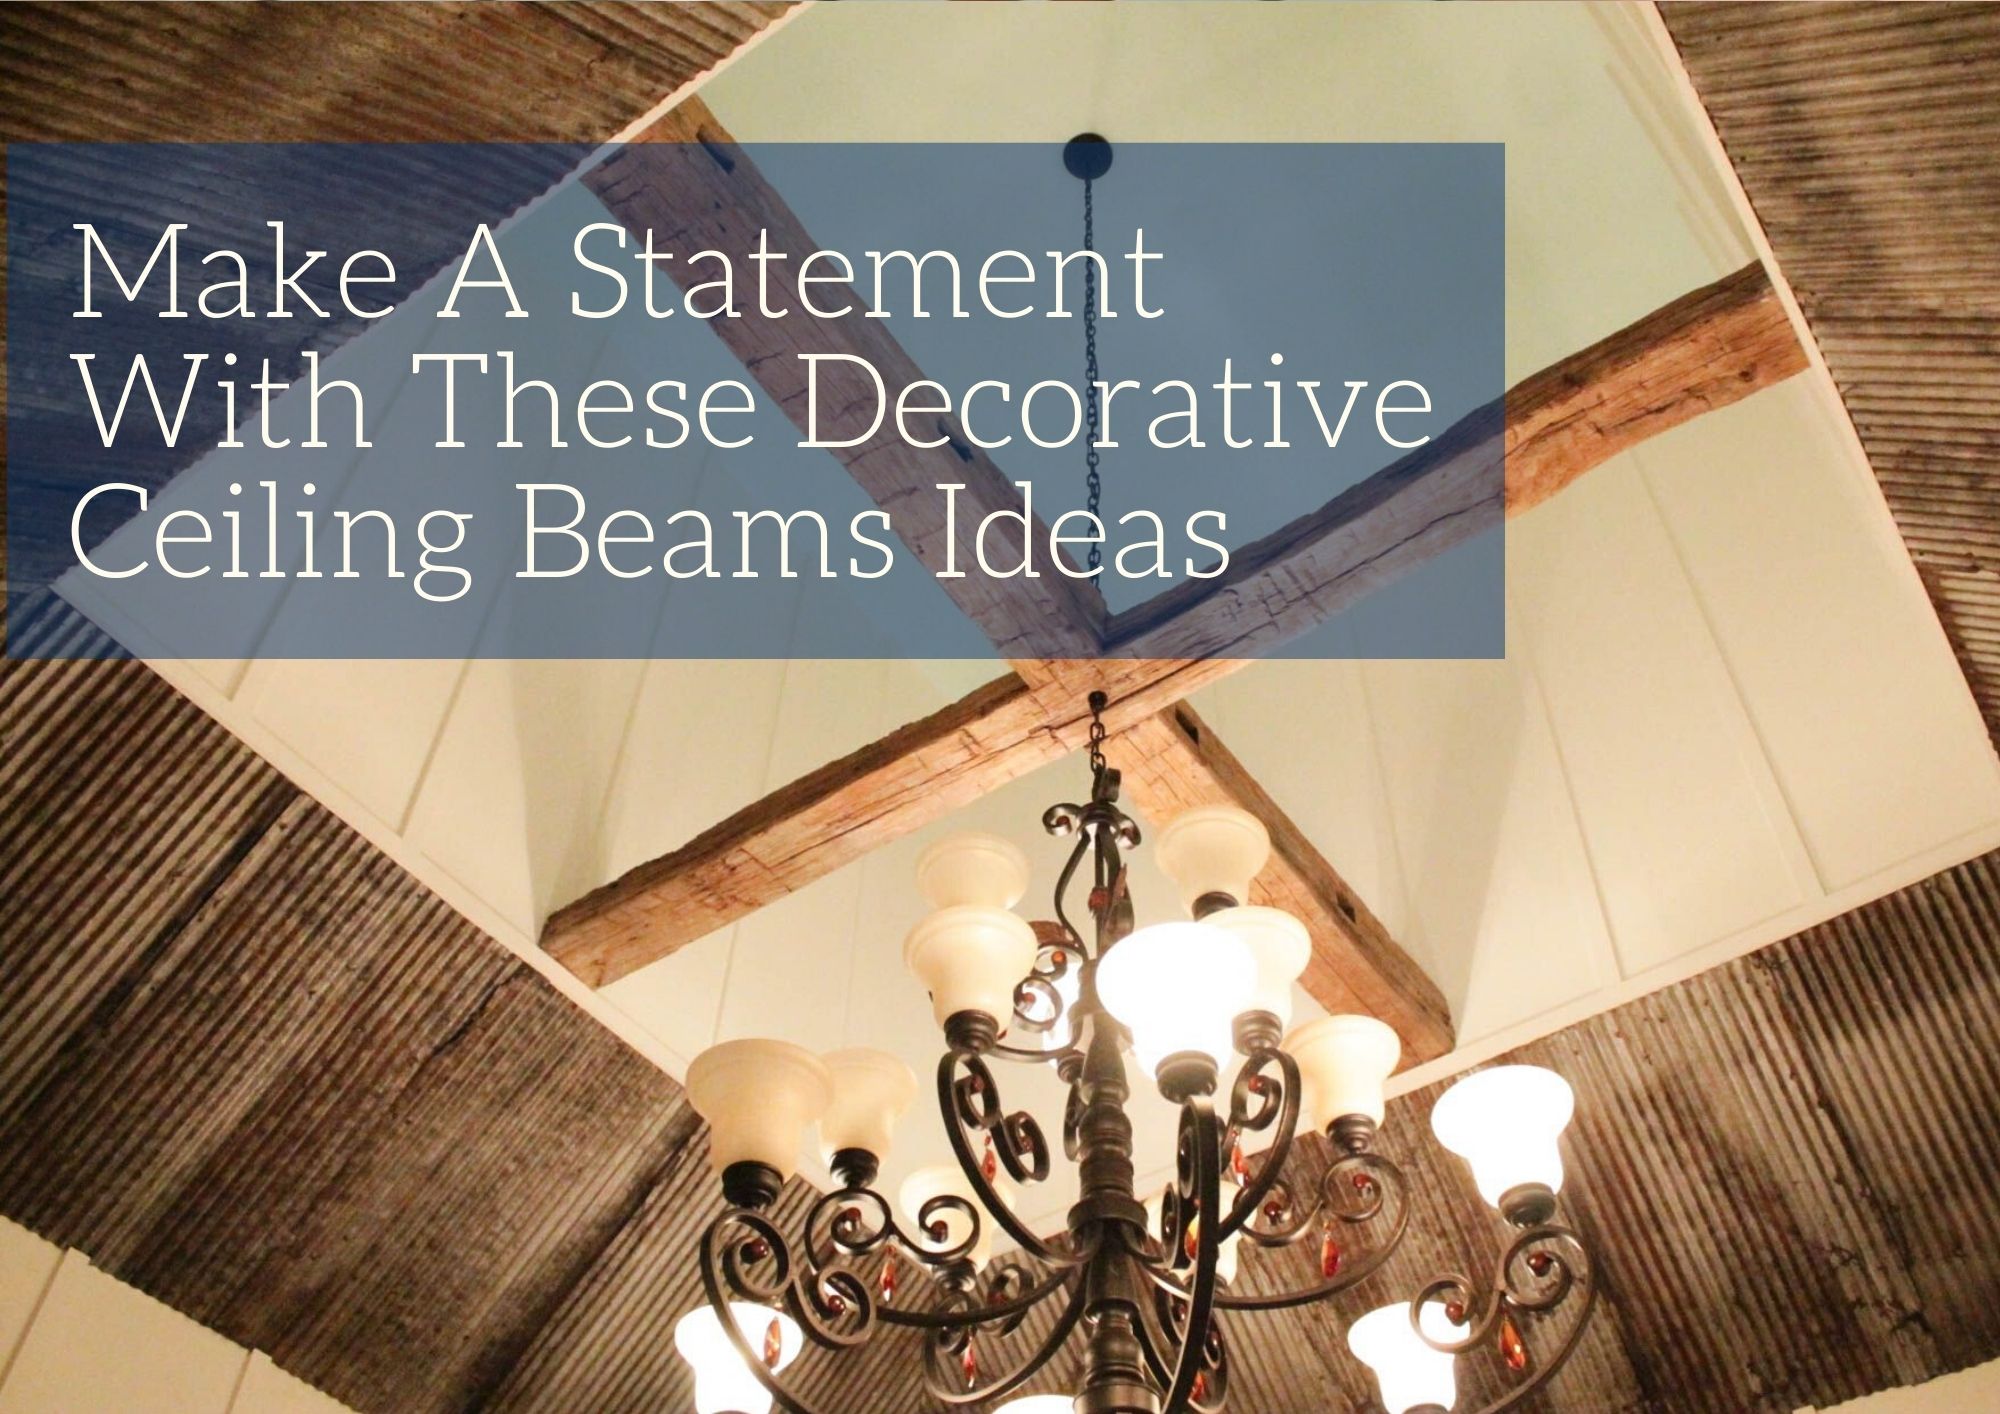 Make A Statement With These Decorative Ceiling Beams Ideas